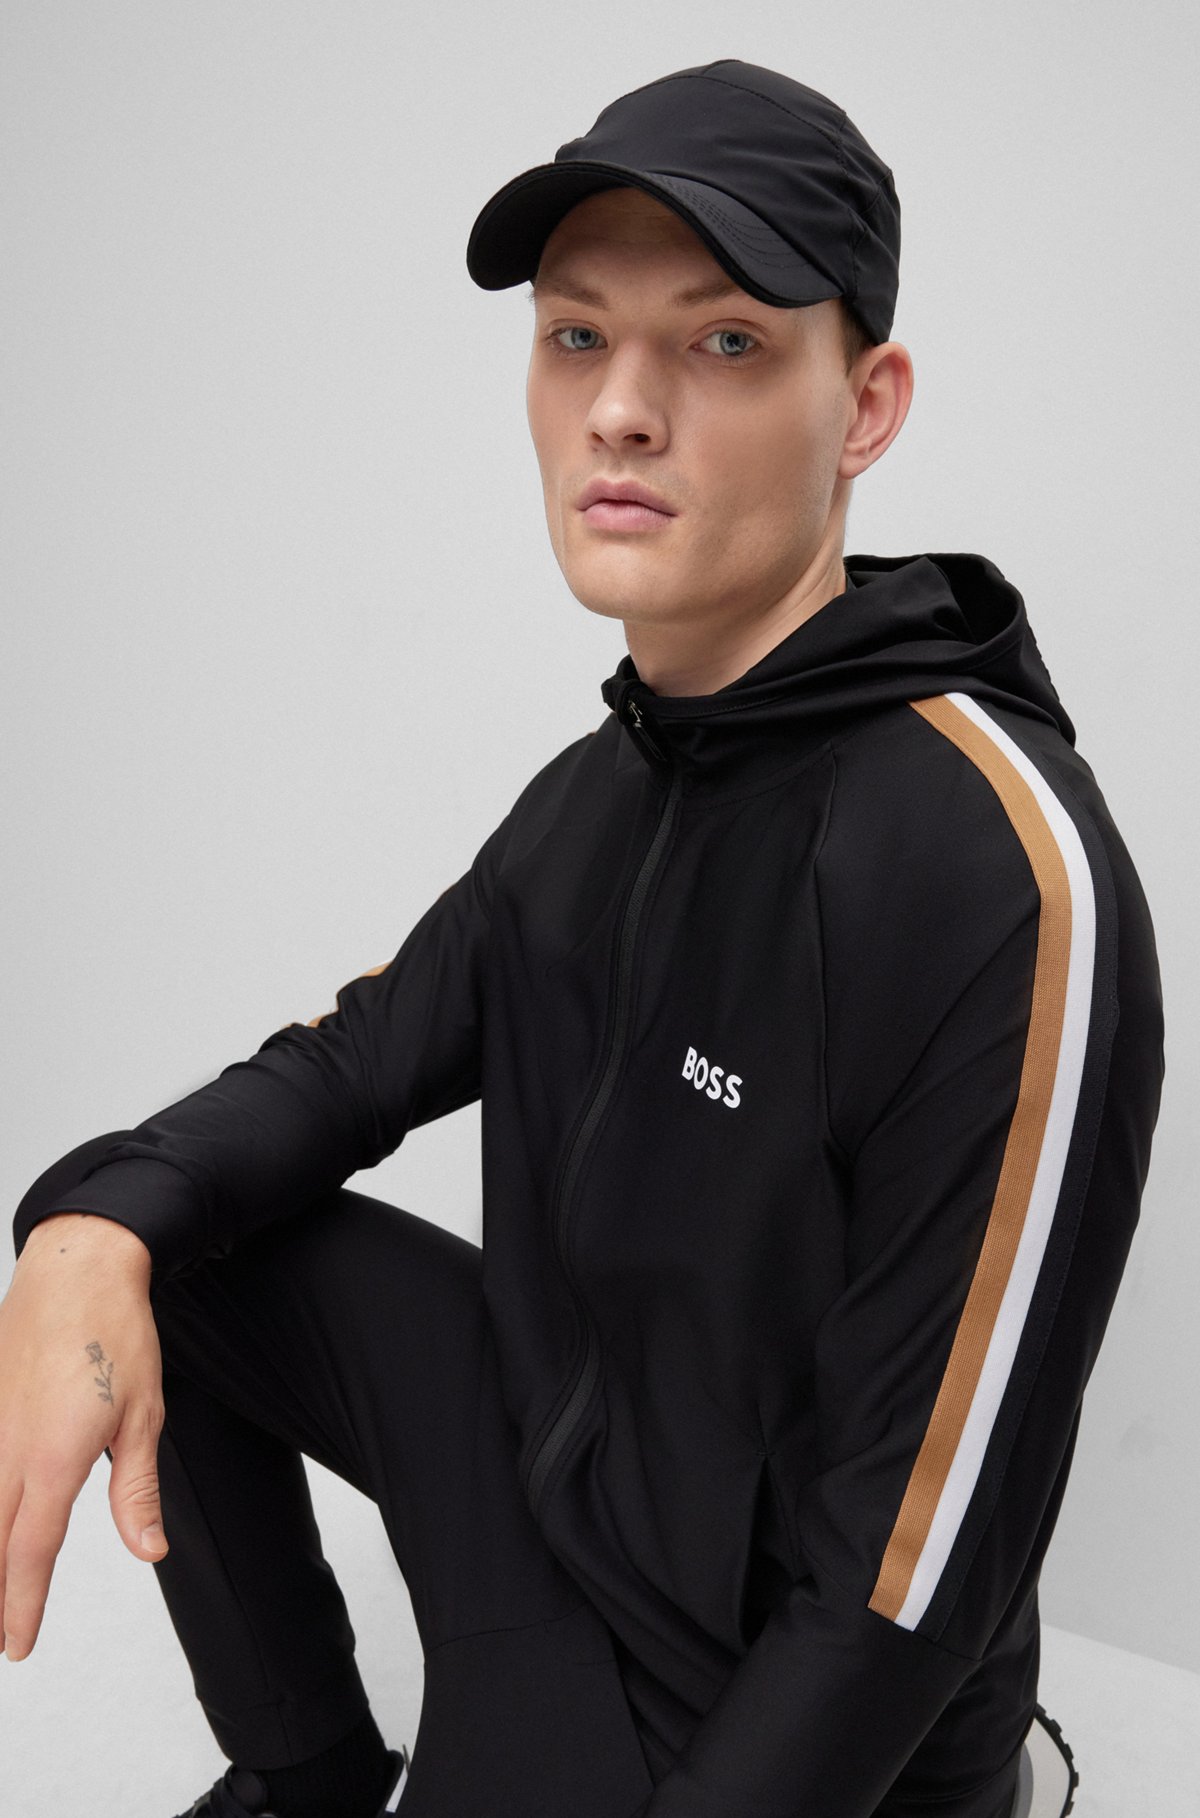 BOSS x Matteo Berrettini Zip-up hoodie in active-stretch jersey with logo, Black